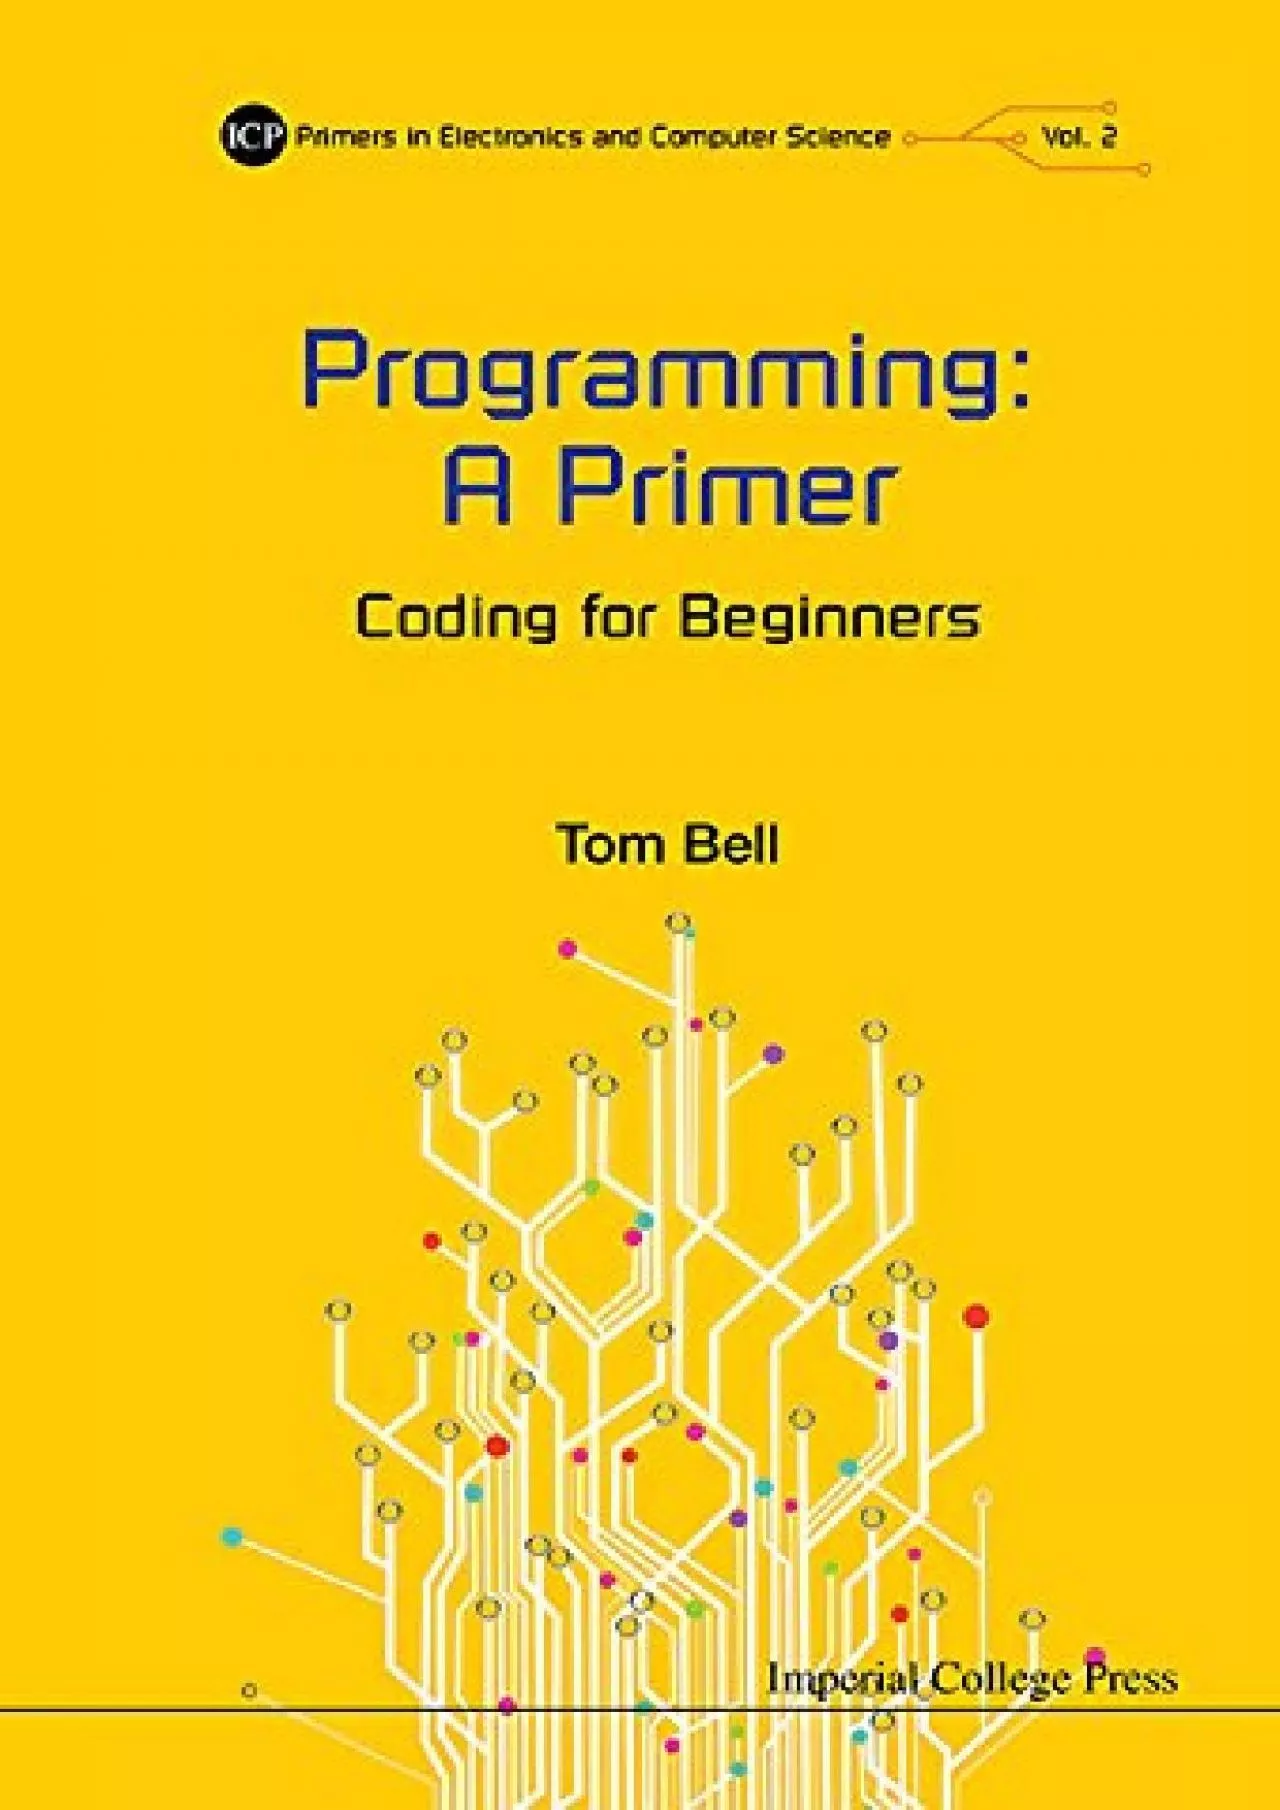 (BOOK)-Programming A Primer - Coding For Beginners A Primer  Coding for Beginners (Icp